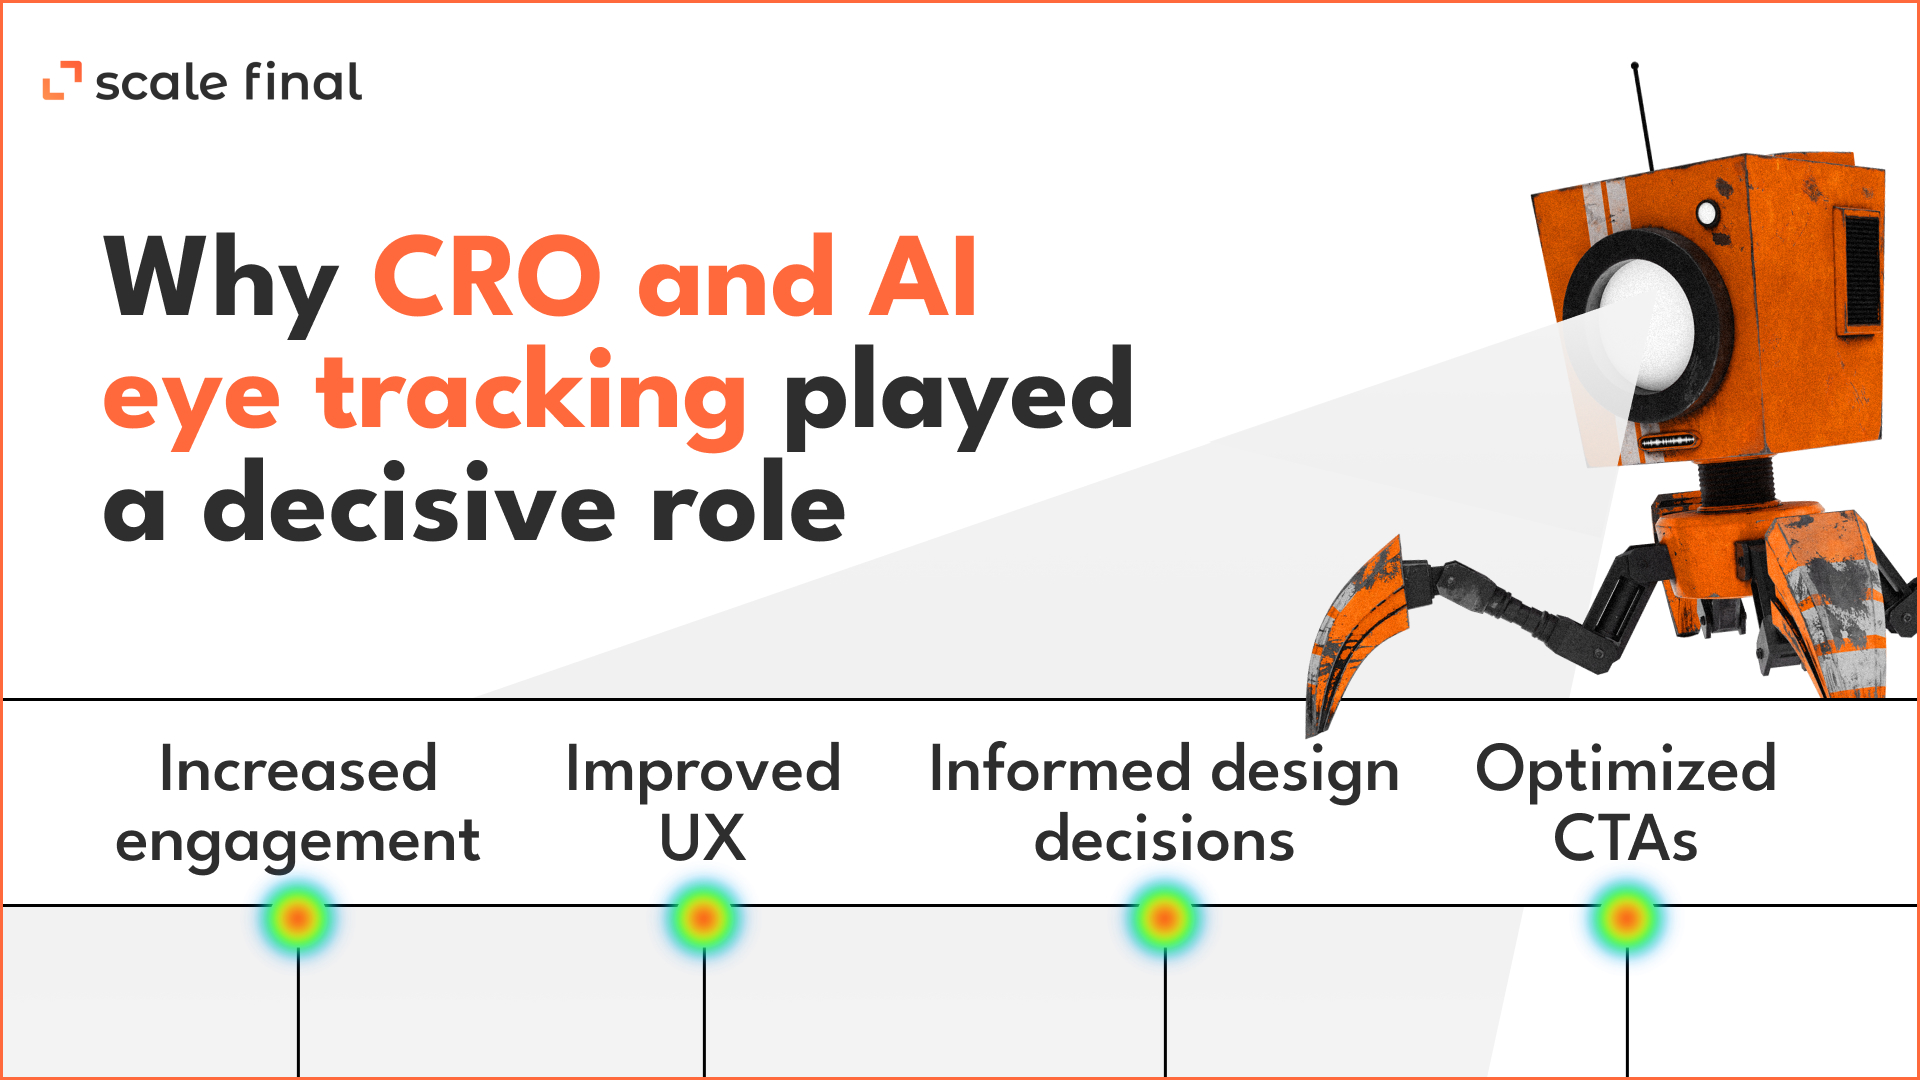 Why CRO and AI eye tracking played a decisive role:Increased engagementImproved UXInformed design decisionsOptimized CTAs